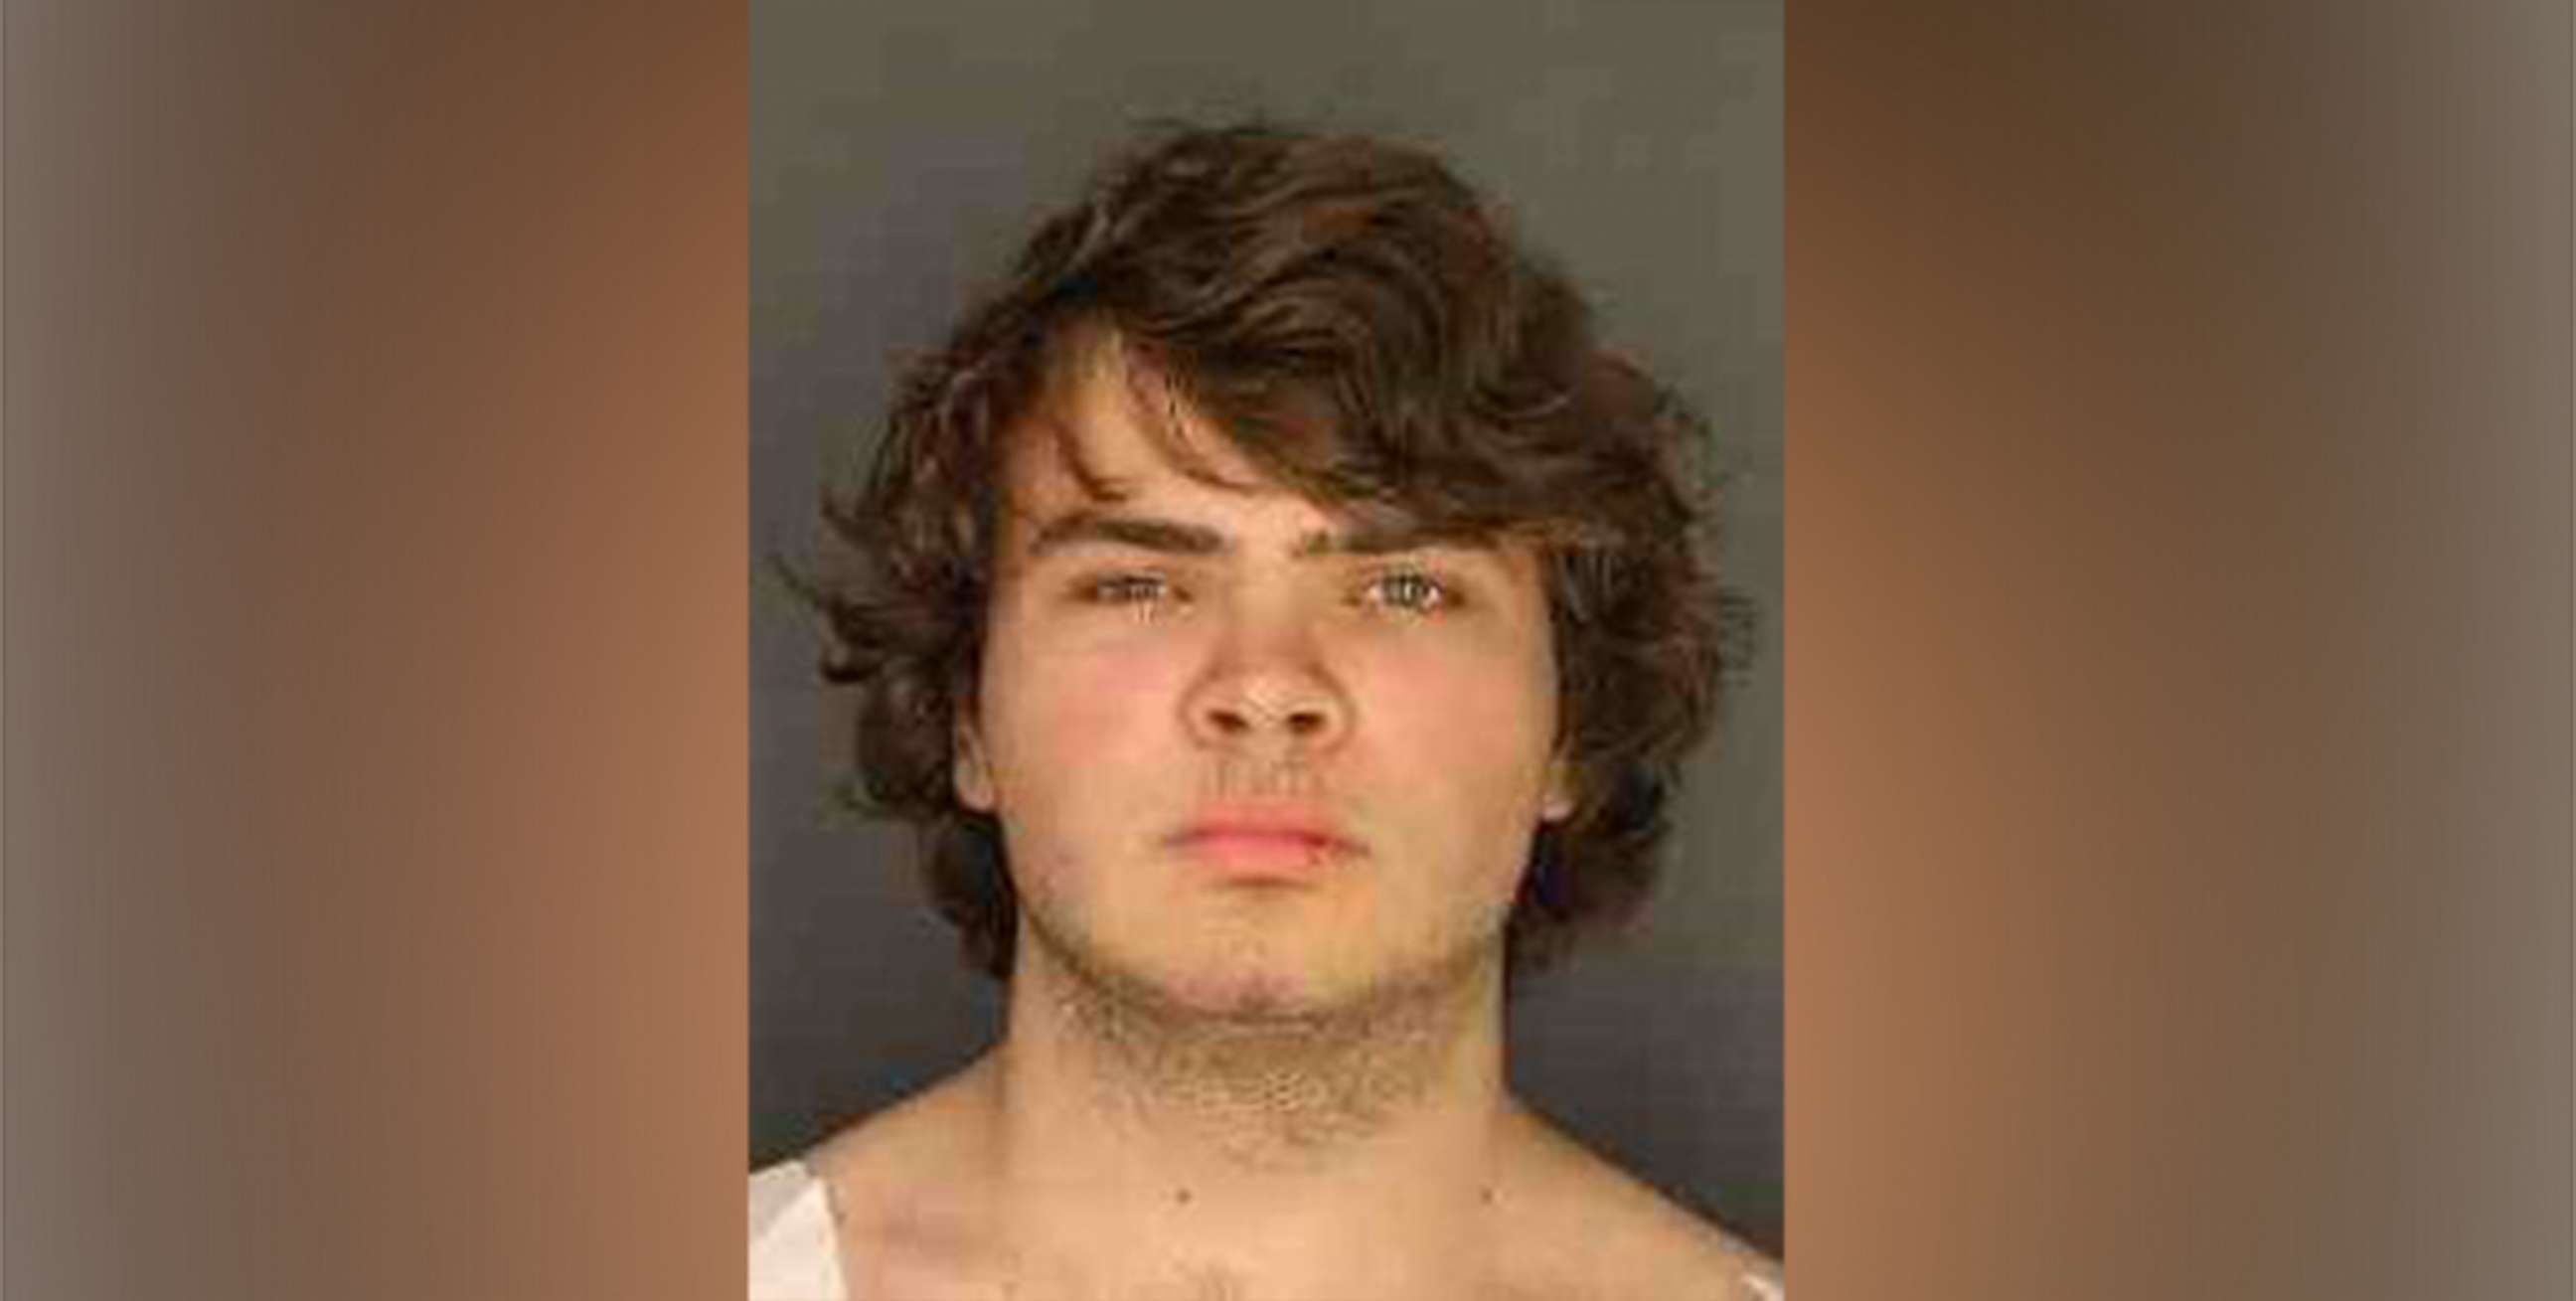 PHOTO: Payton Gendron, a suspect in a shooting in Bingingham, NY is pictured in a booking photo released by law enforcement on May 15, 2022.